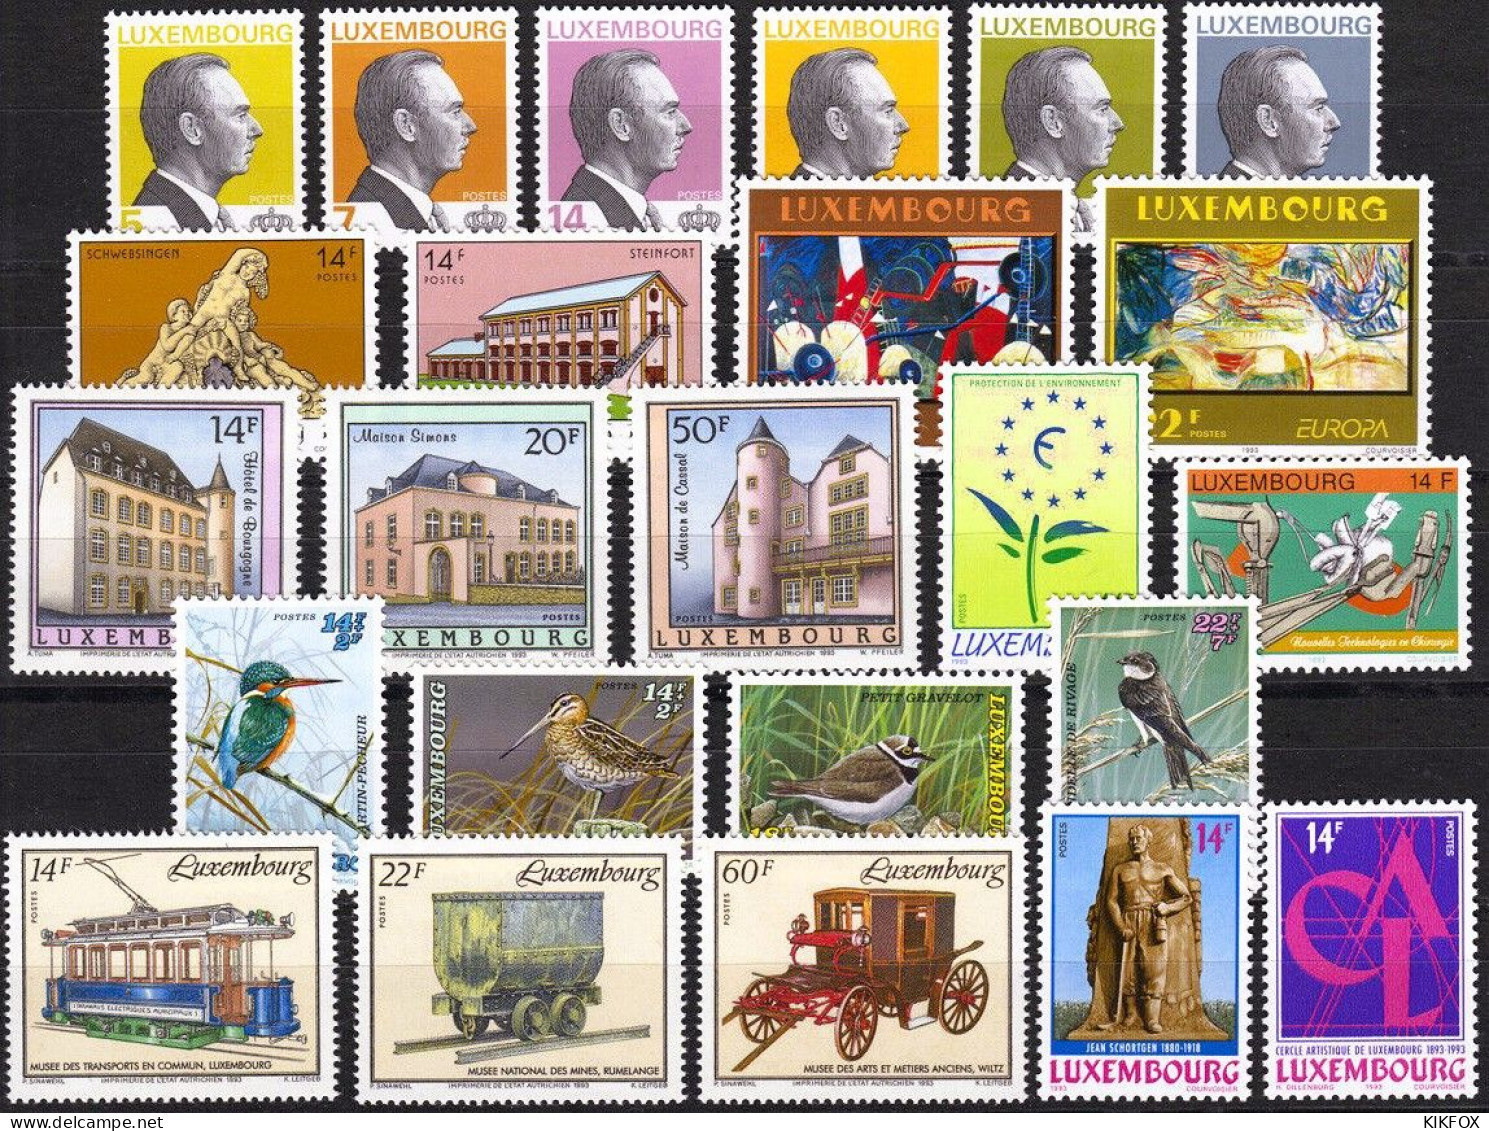 LUXEMBOURG,LUXEMBURG,1993 ,MI NR 1310 -1333 , YT 1288 -1209, JAHRGANG KPL , Complete Year , POSTFRISCH - Full Years